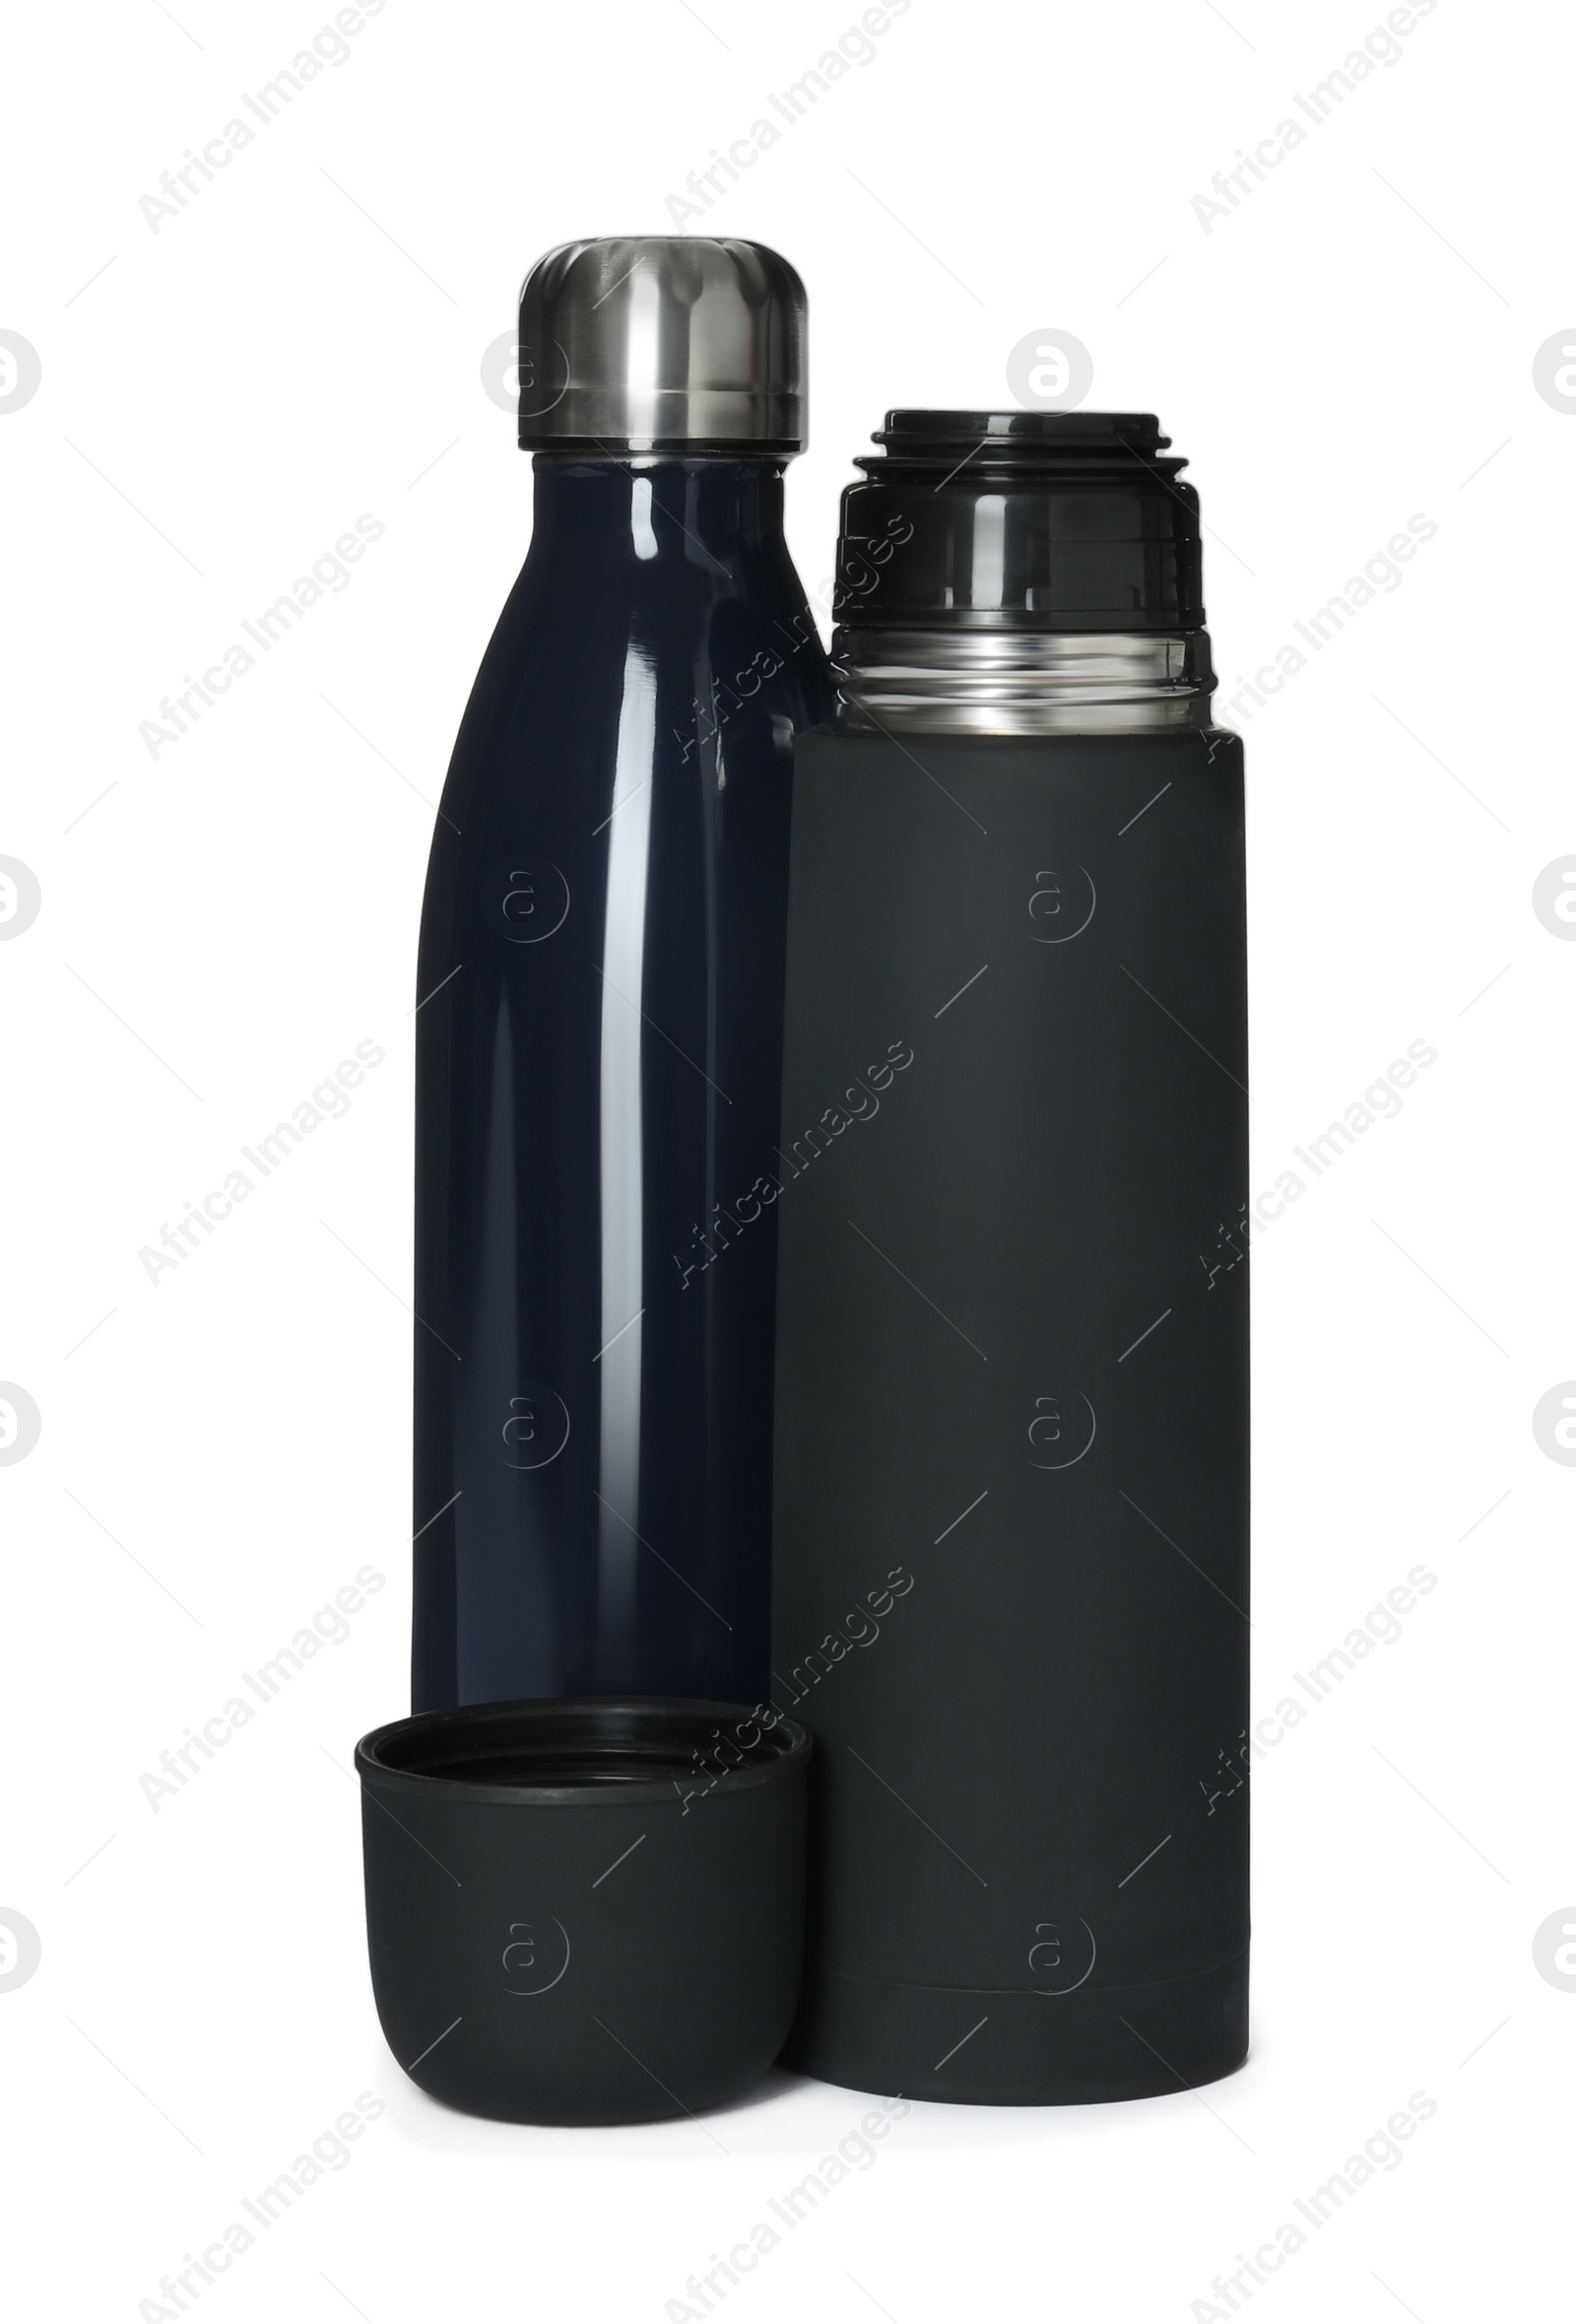 Photo of Modern thermos and bottle on white background